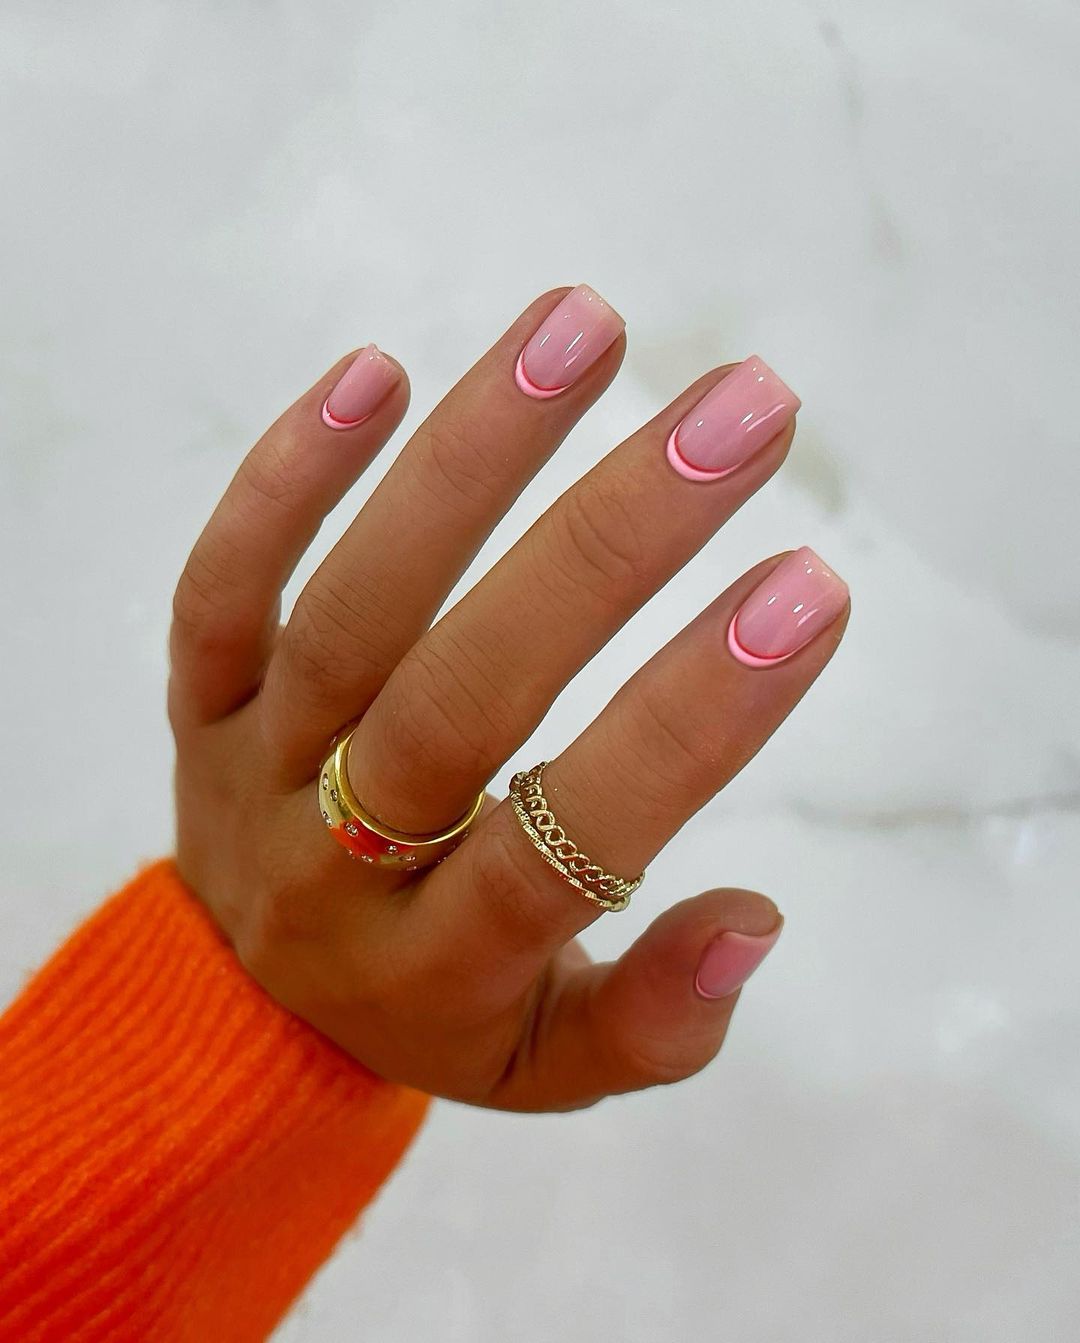 50 Autumn Nail Designs To Try In 2021 | Cliphair Uk